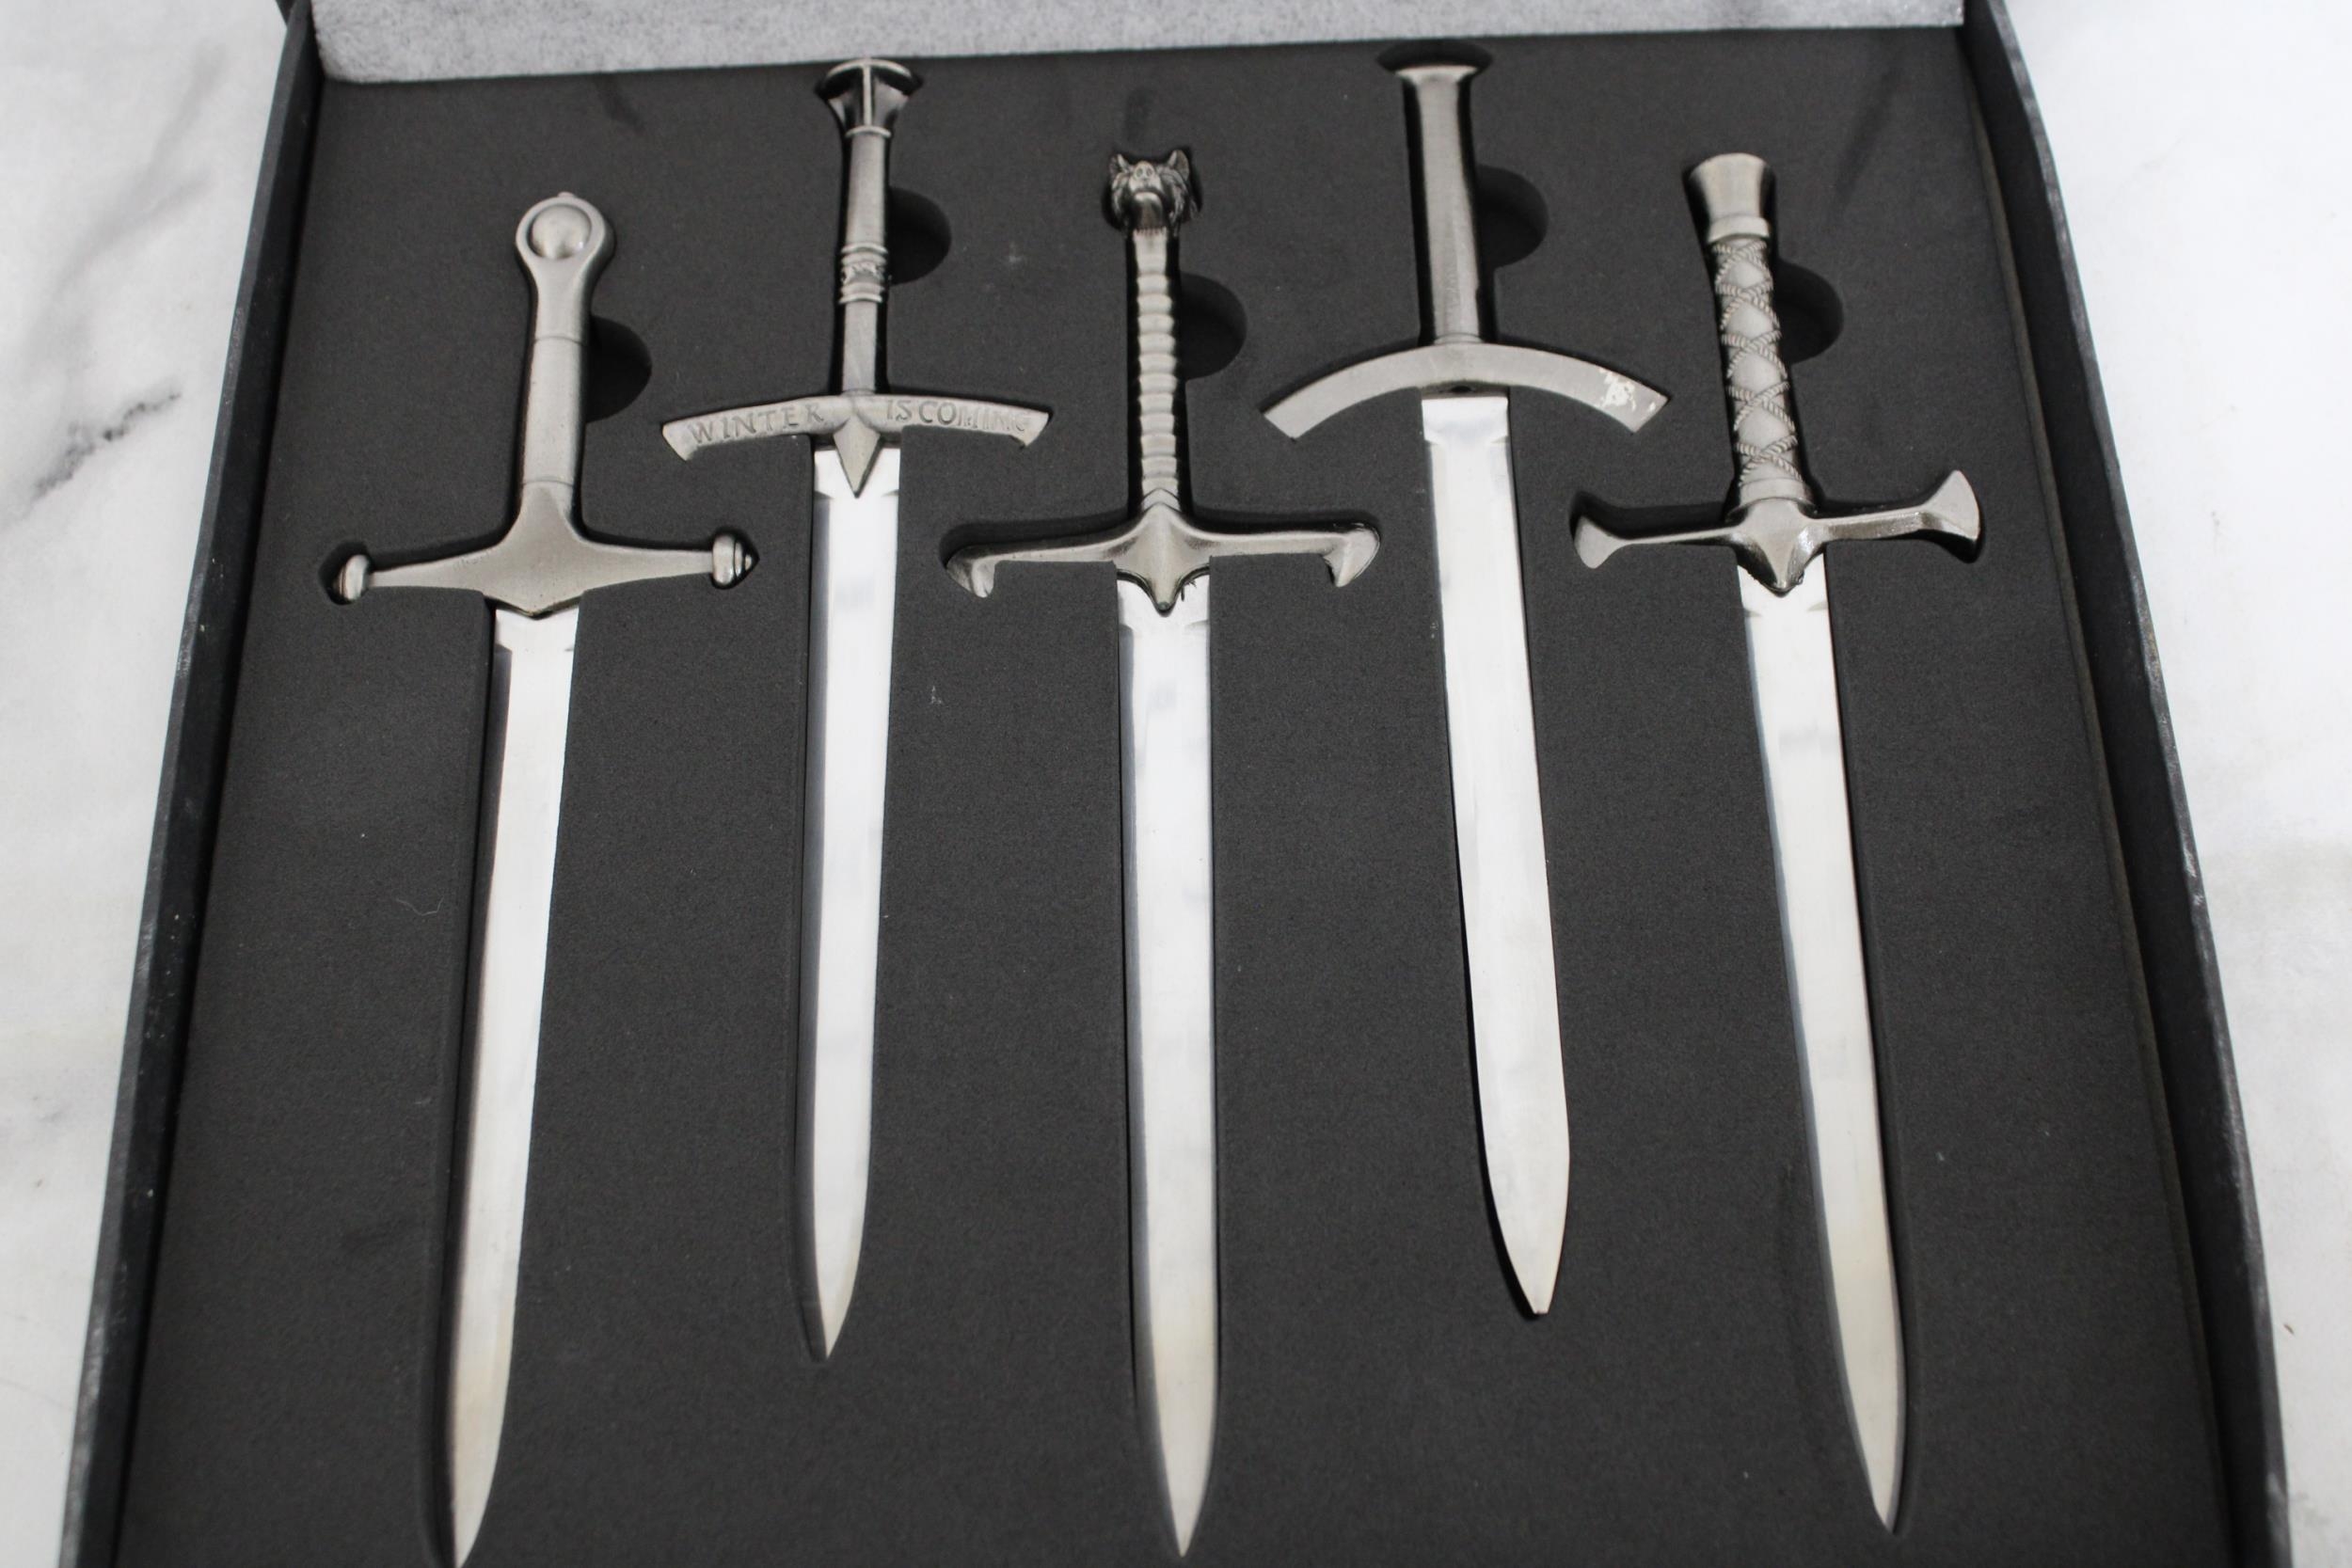 Pre Owned Game of Thrones Letter Openers - Image 2 of 2